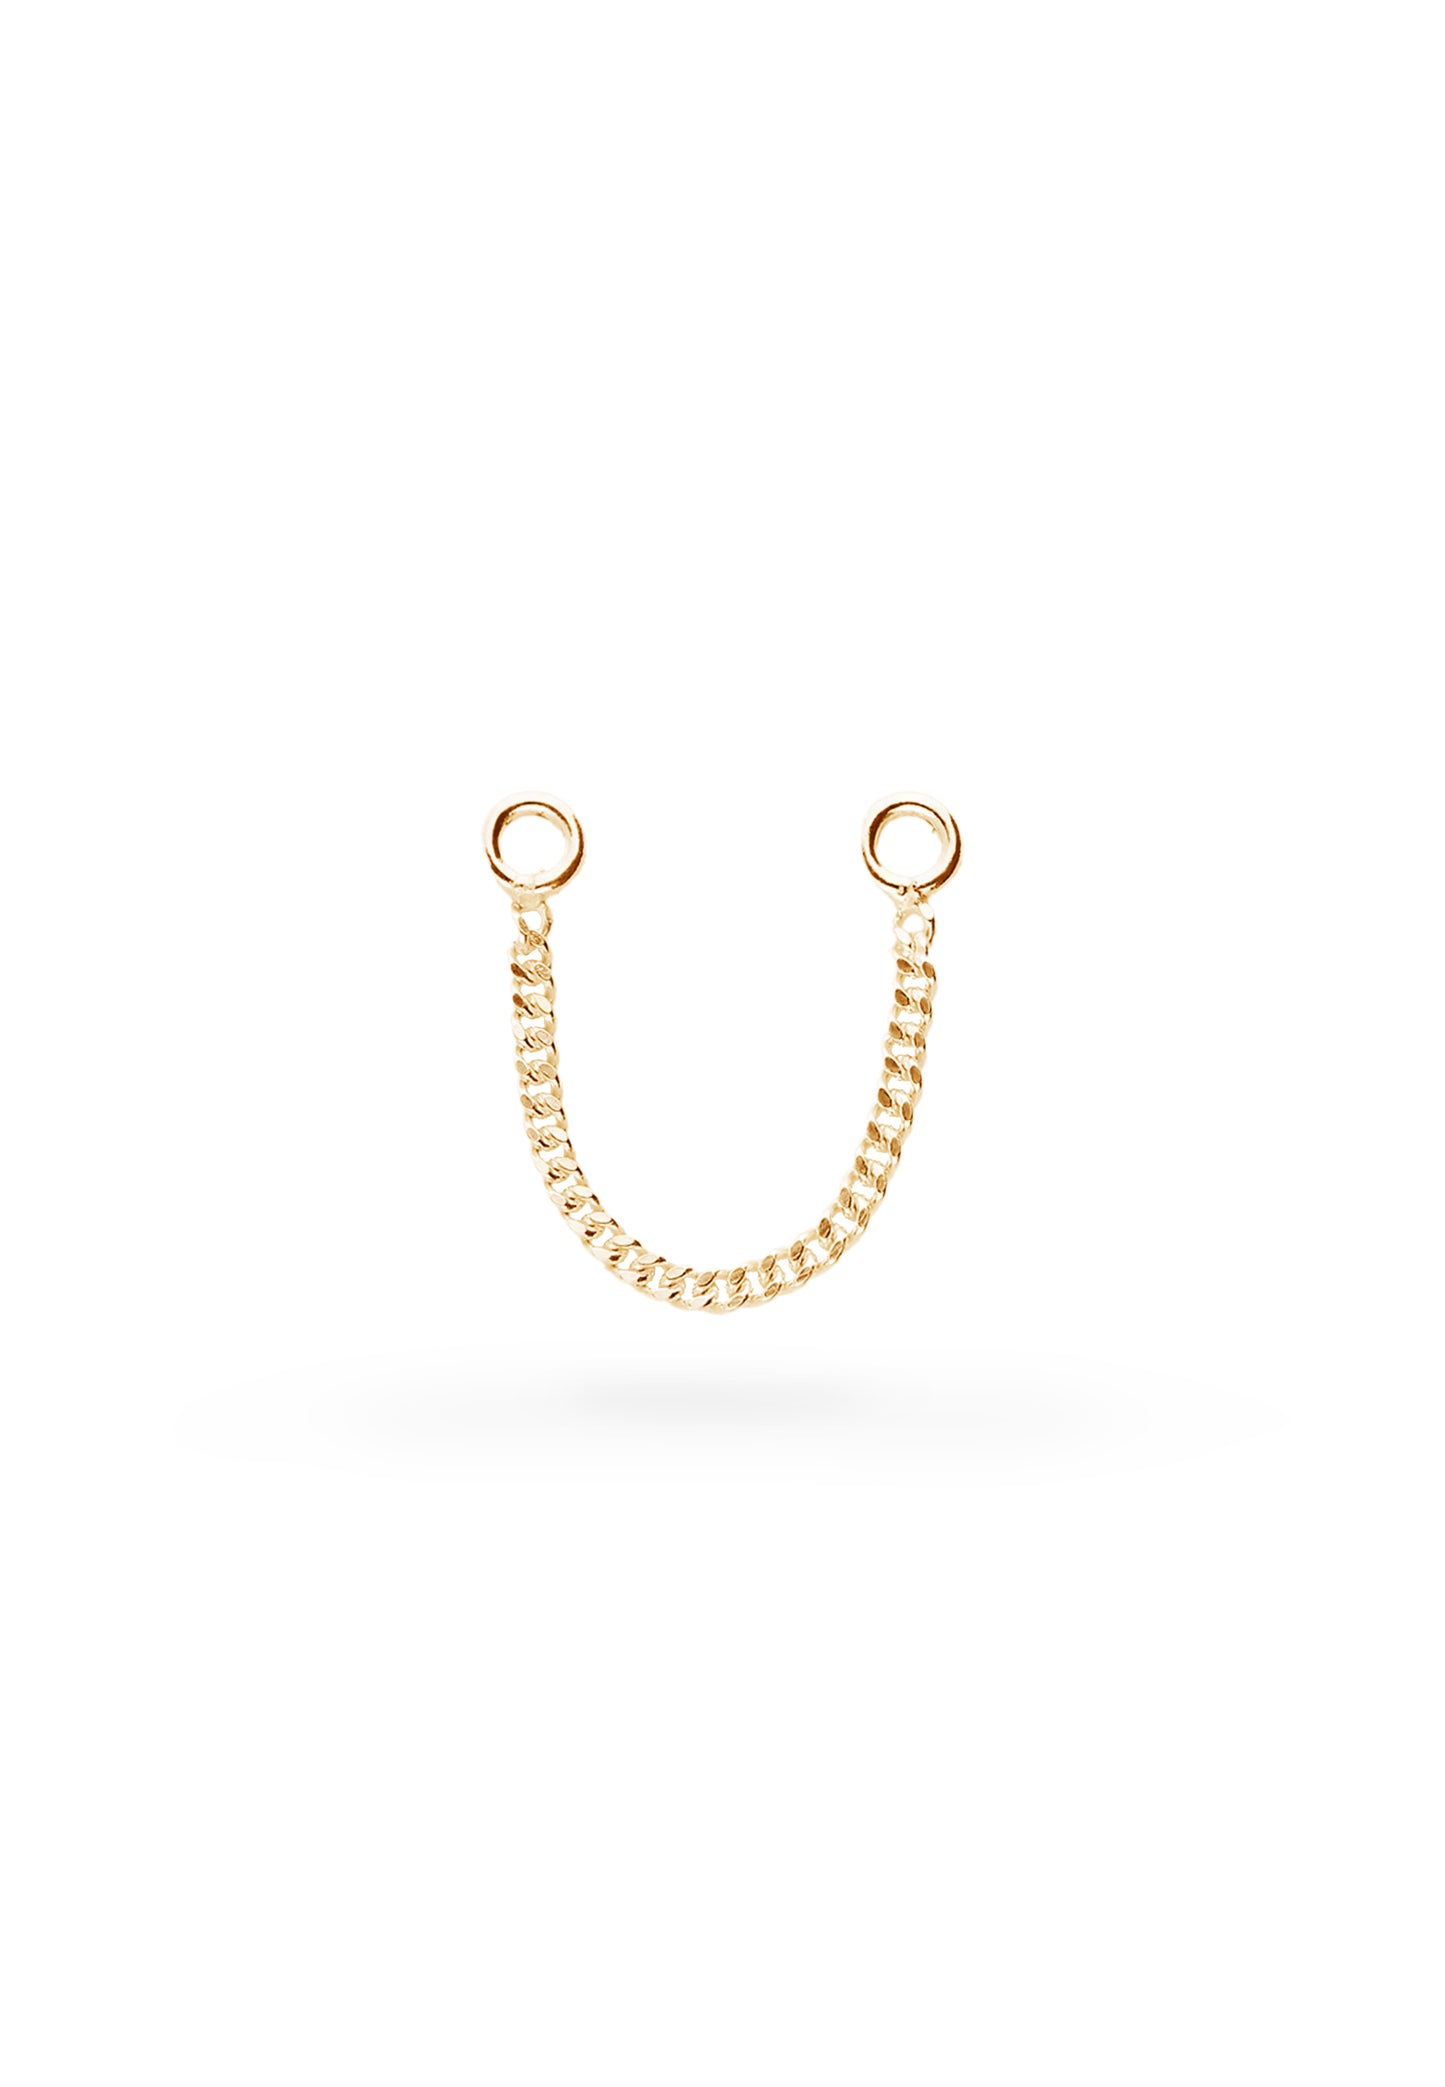 KETTE OHRRING CURB GOLD